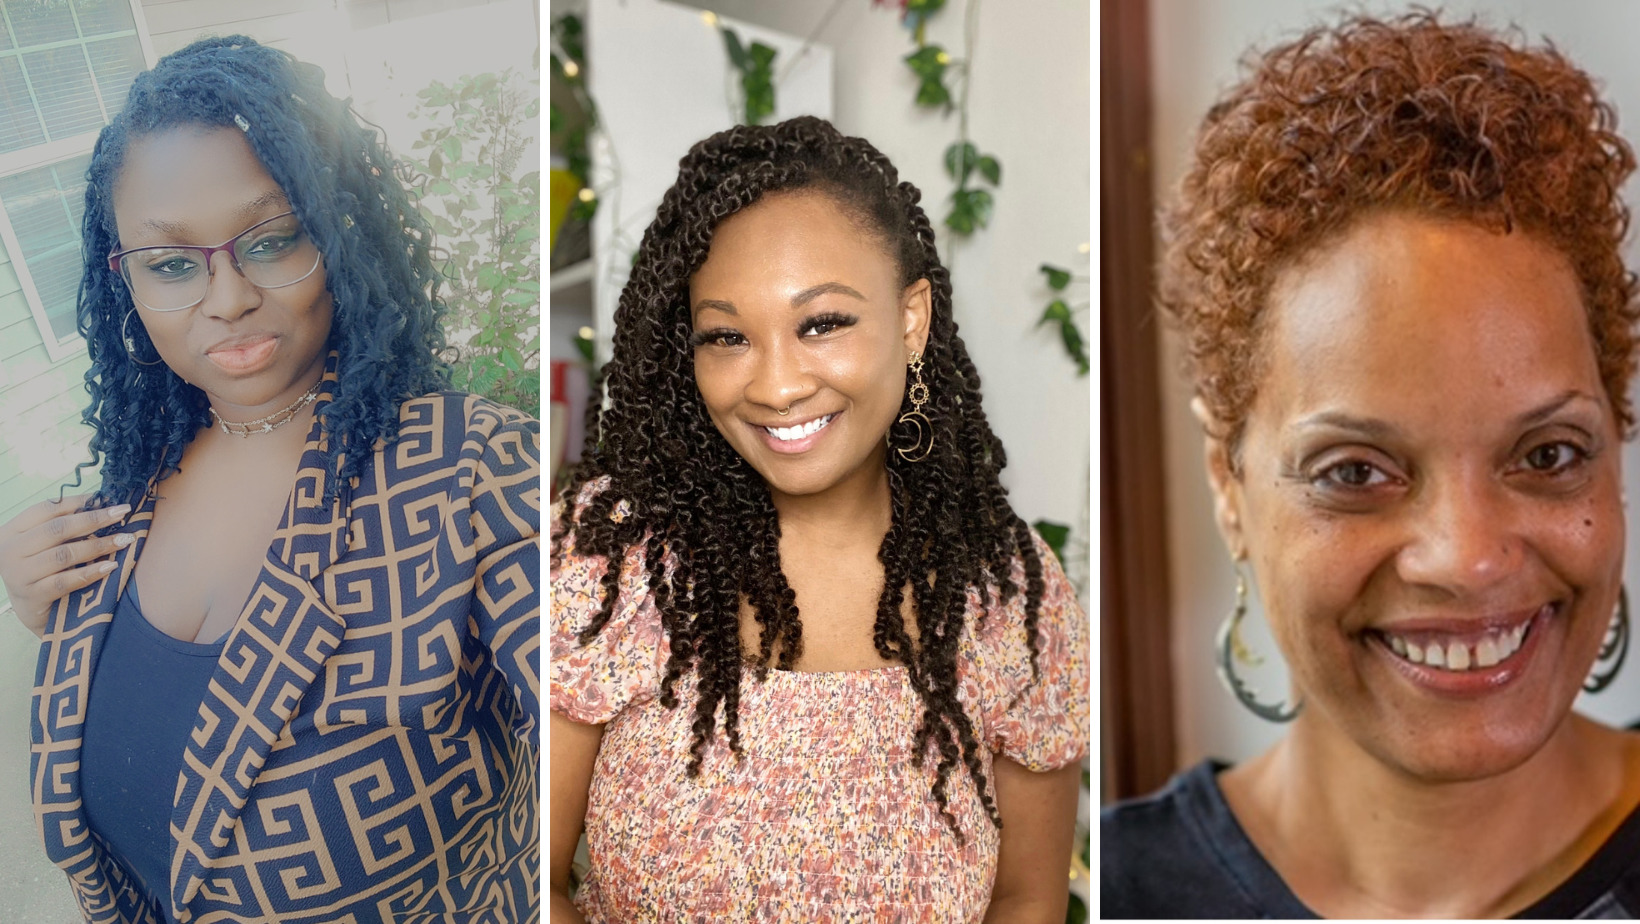 Three headshots of Black women, side by side. The first has medium length black hair, glasses, and a plaid blazer. The second has long black hair and a floral top, the third has short reddish brown hair and a navy blue top.